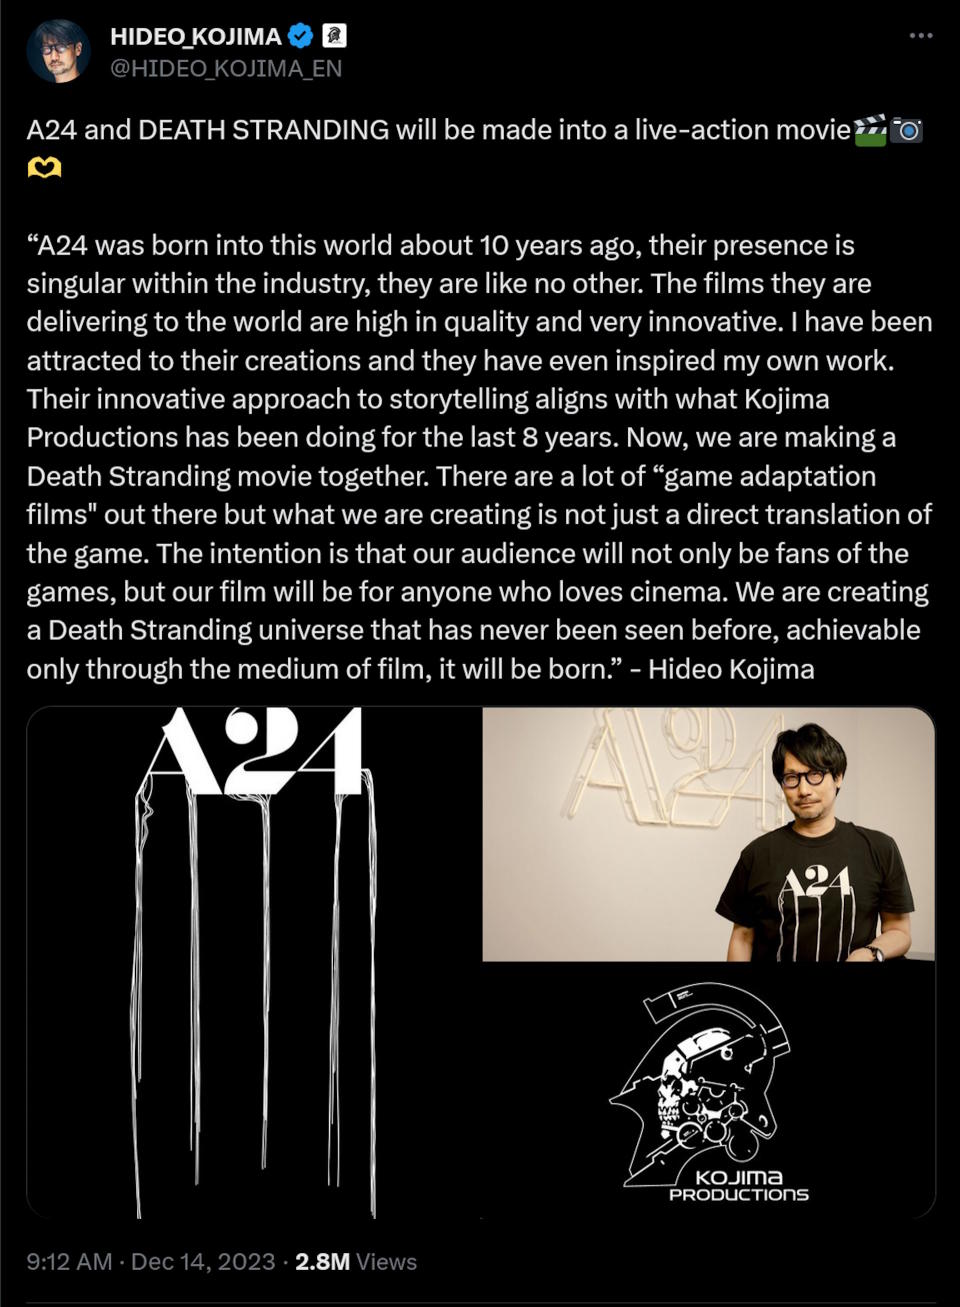 A24 and DEATH STRANDING will be made into a live-action movie������  “A24 was born into this world about 10 years ago, their presence is singular within the industry, they are like no other. The films they are delivering to the world are high in quality and very innovative. I have been attracted to their creations and they have even inspired my own work. Their innovative approach to storytelling aligns with what Kojima Productions has been doing for the last 8 years. Now, we are making a Death Stranding movie together. There are a lot of “game adaptation films